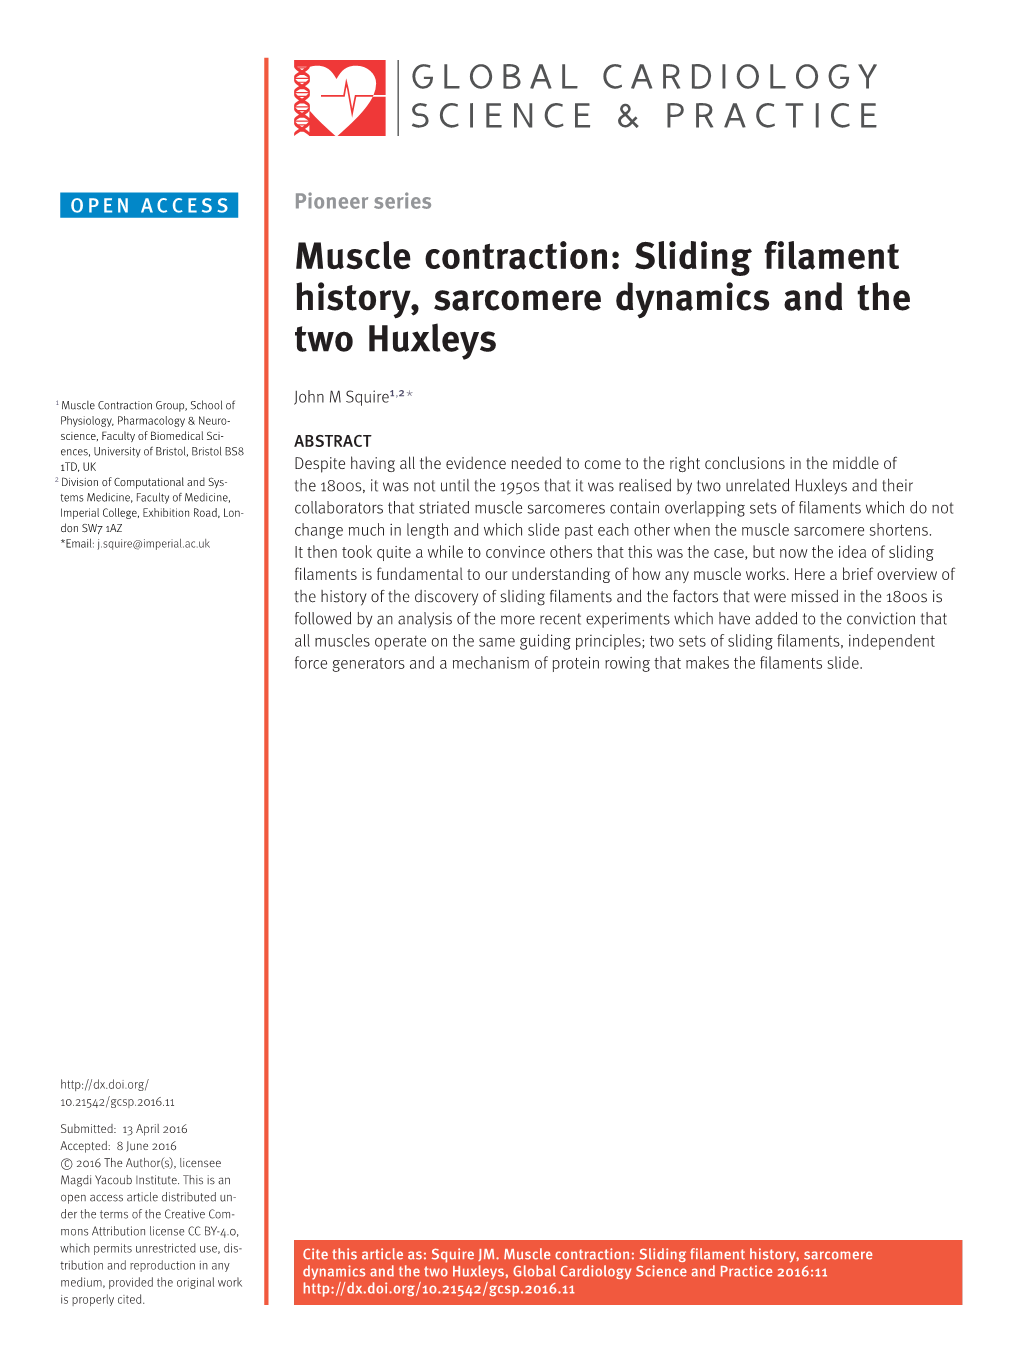 Sliding Filament History, Sarcomere Dynamics and the Two Huxleys